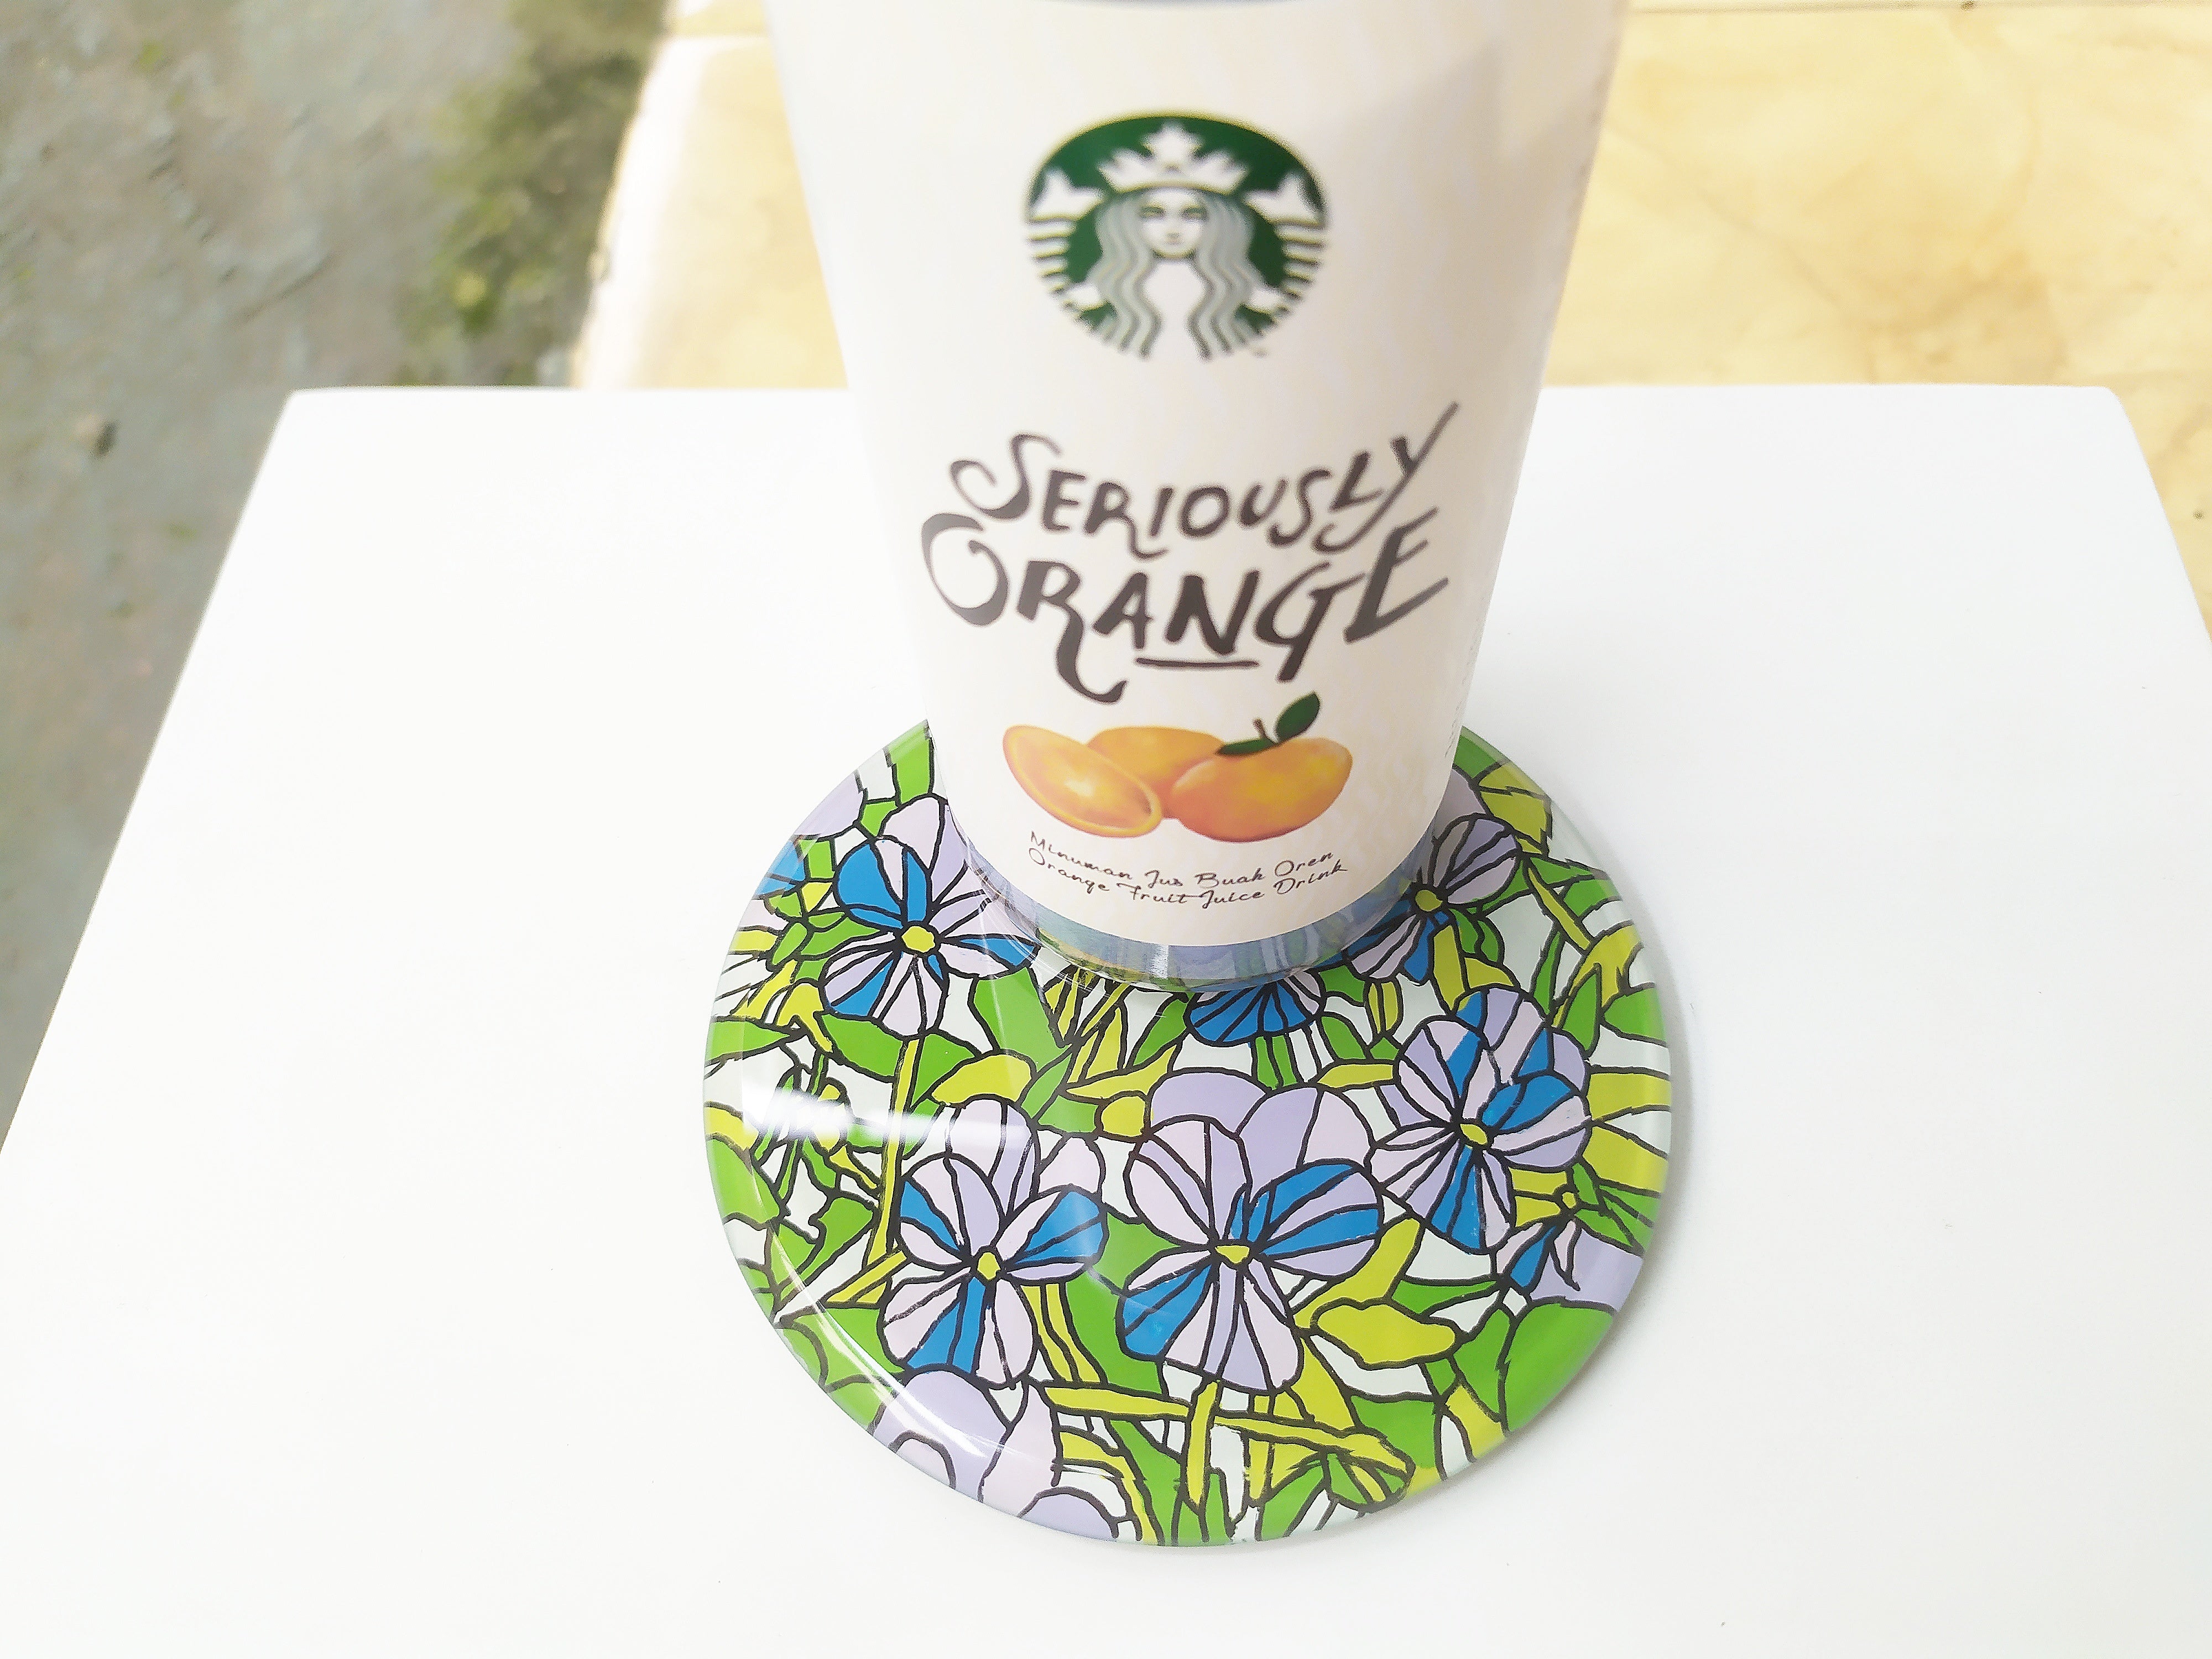 Reverse hand painted mirror and glass coaster with flower pattern , with starbuck cup